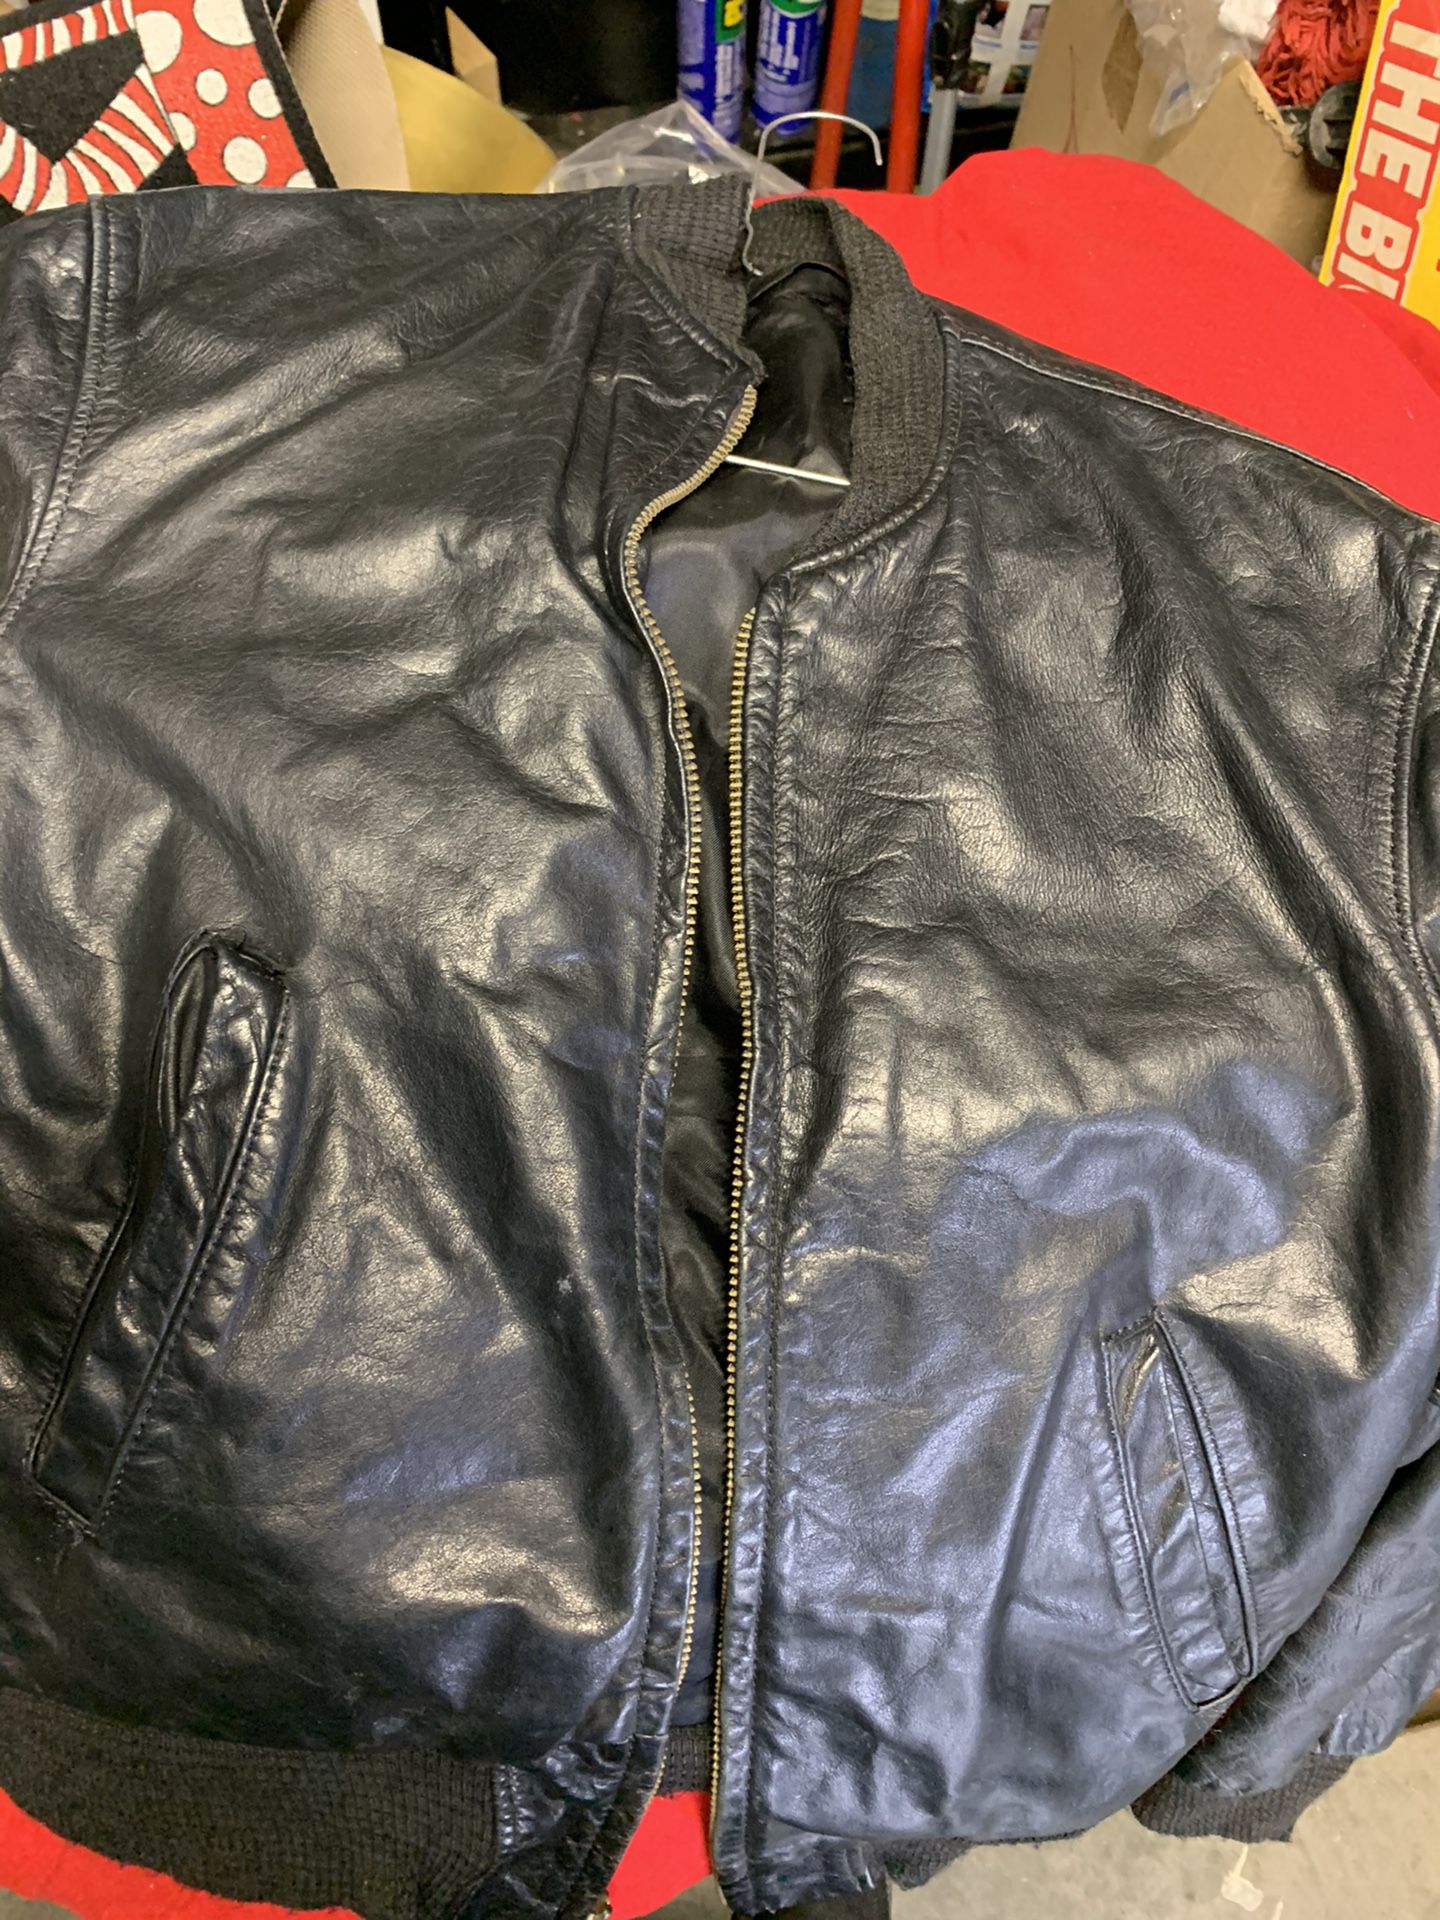 2 real leather jackets , 1 brown & 1black,small men’s size 36 , $10 Each or $15 for both